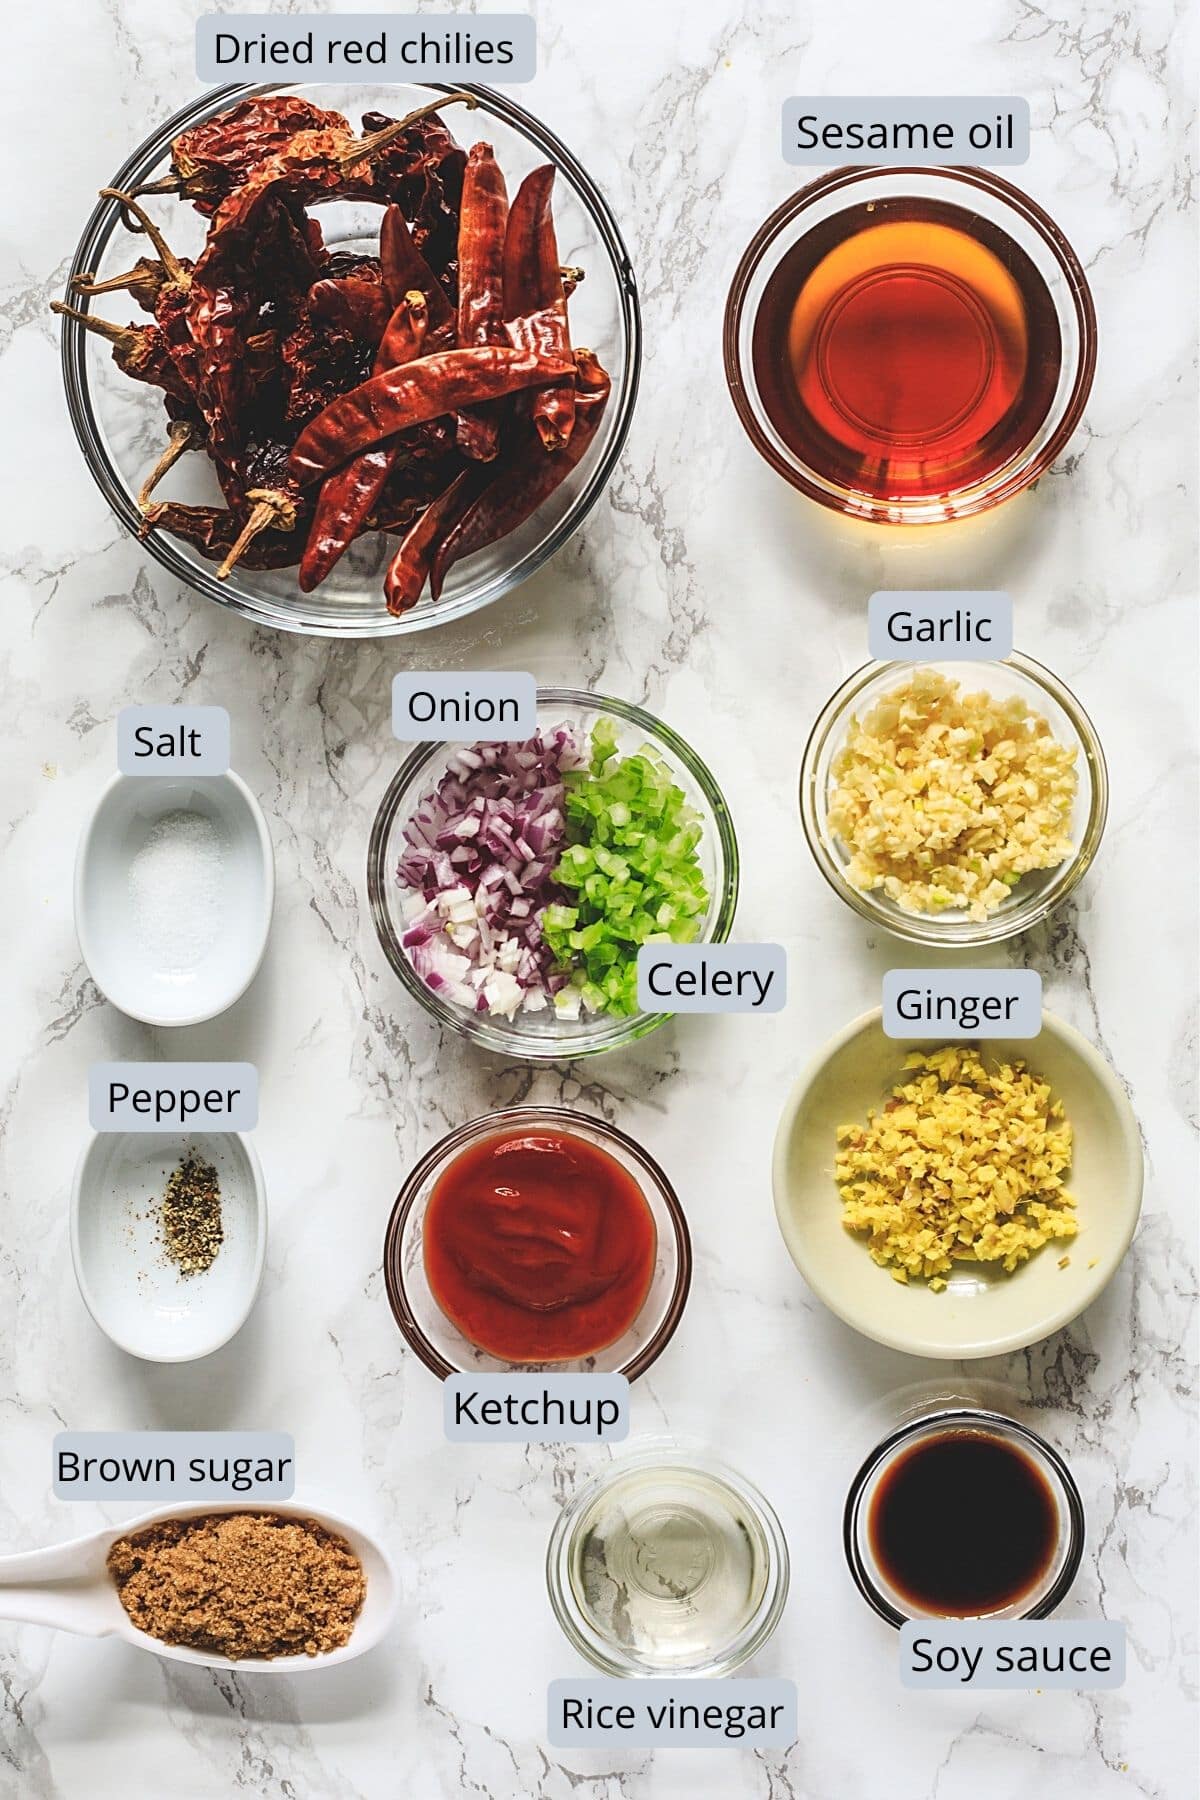 Ingredients used in schezwan sauce includes chilies, oil, onion, celery, ginger, garlic, vinegar, soy sauce, ketchup, sugar.